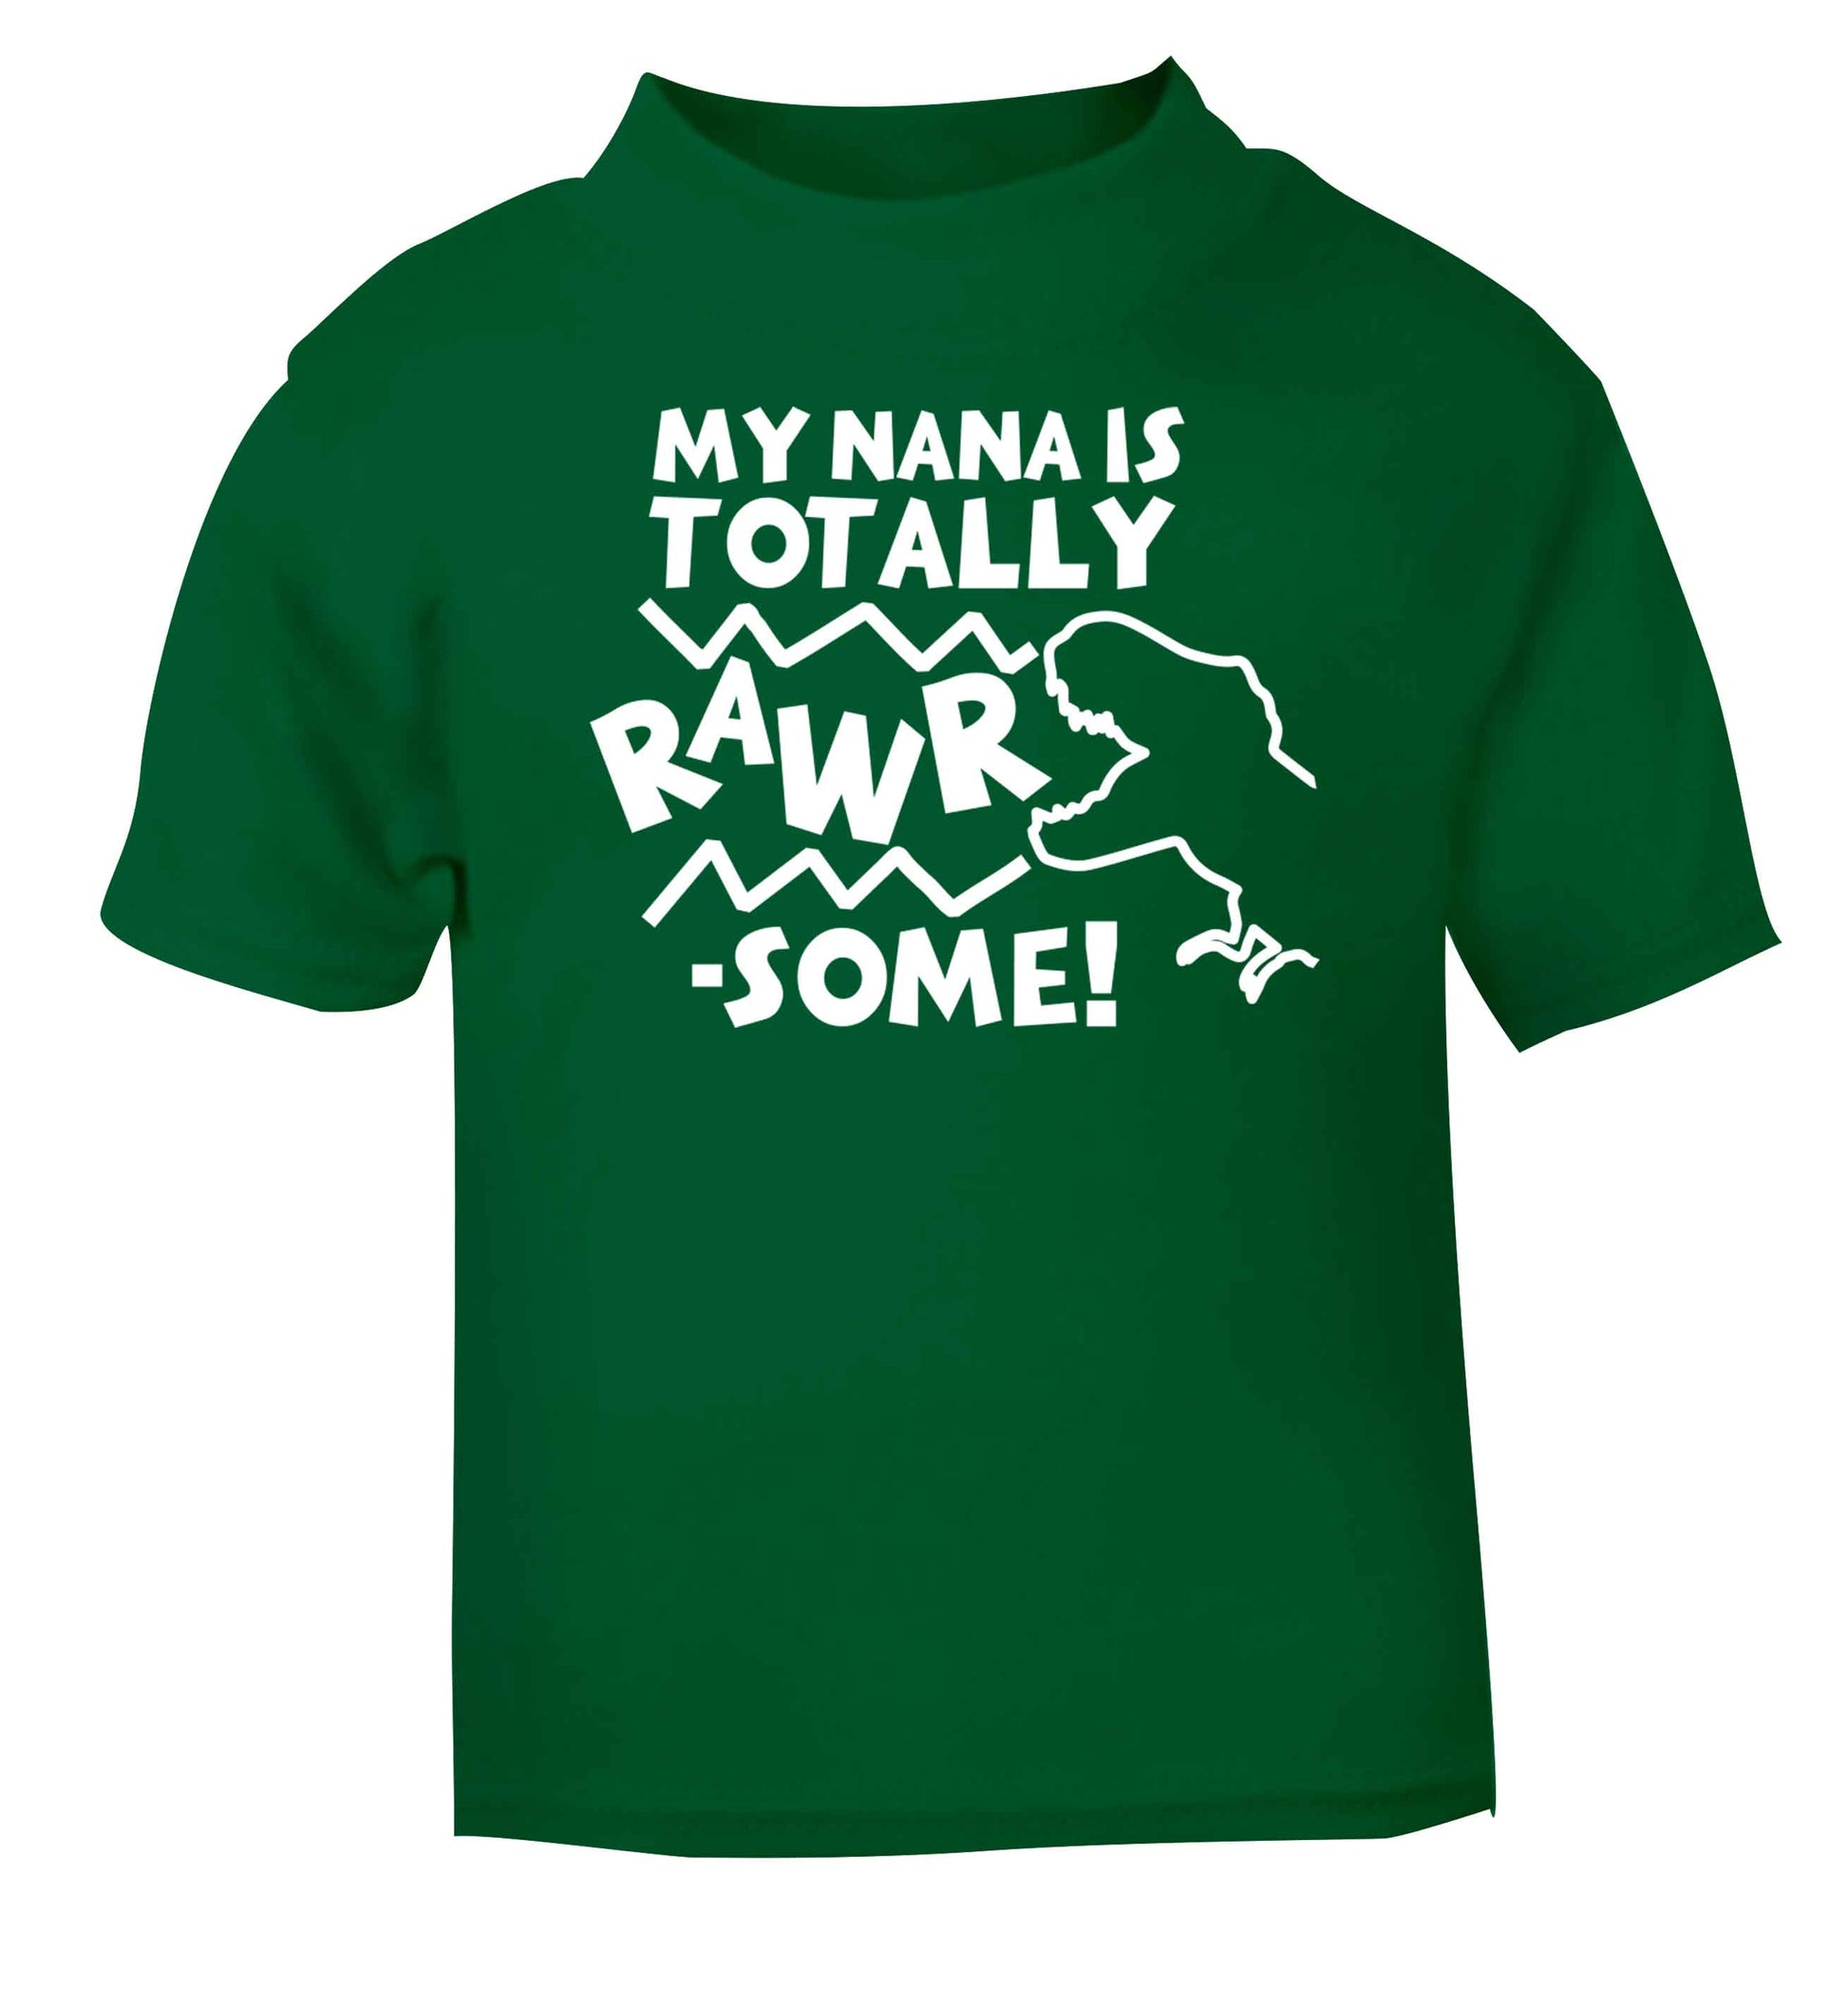 My nana is totally rawrsome green baby toddler Tshirt 2 Years